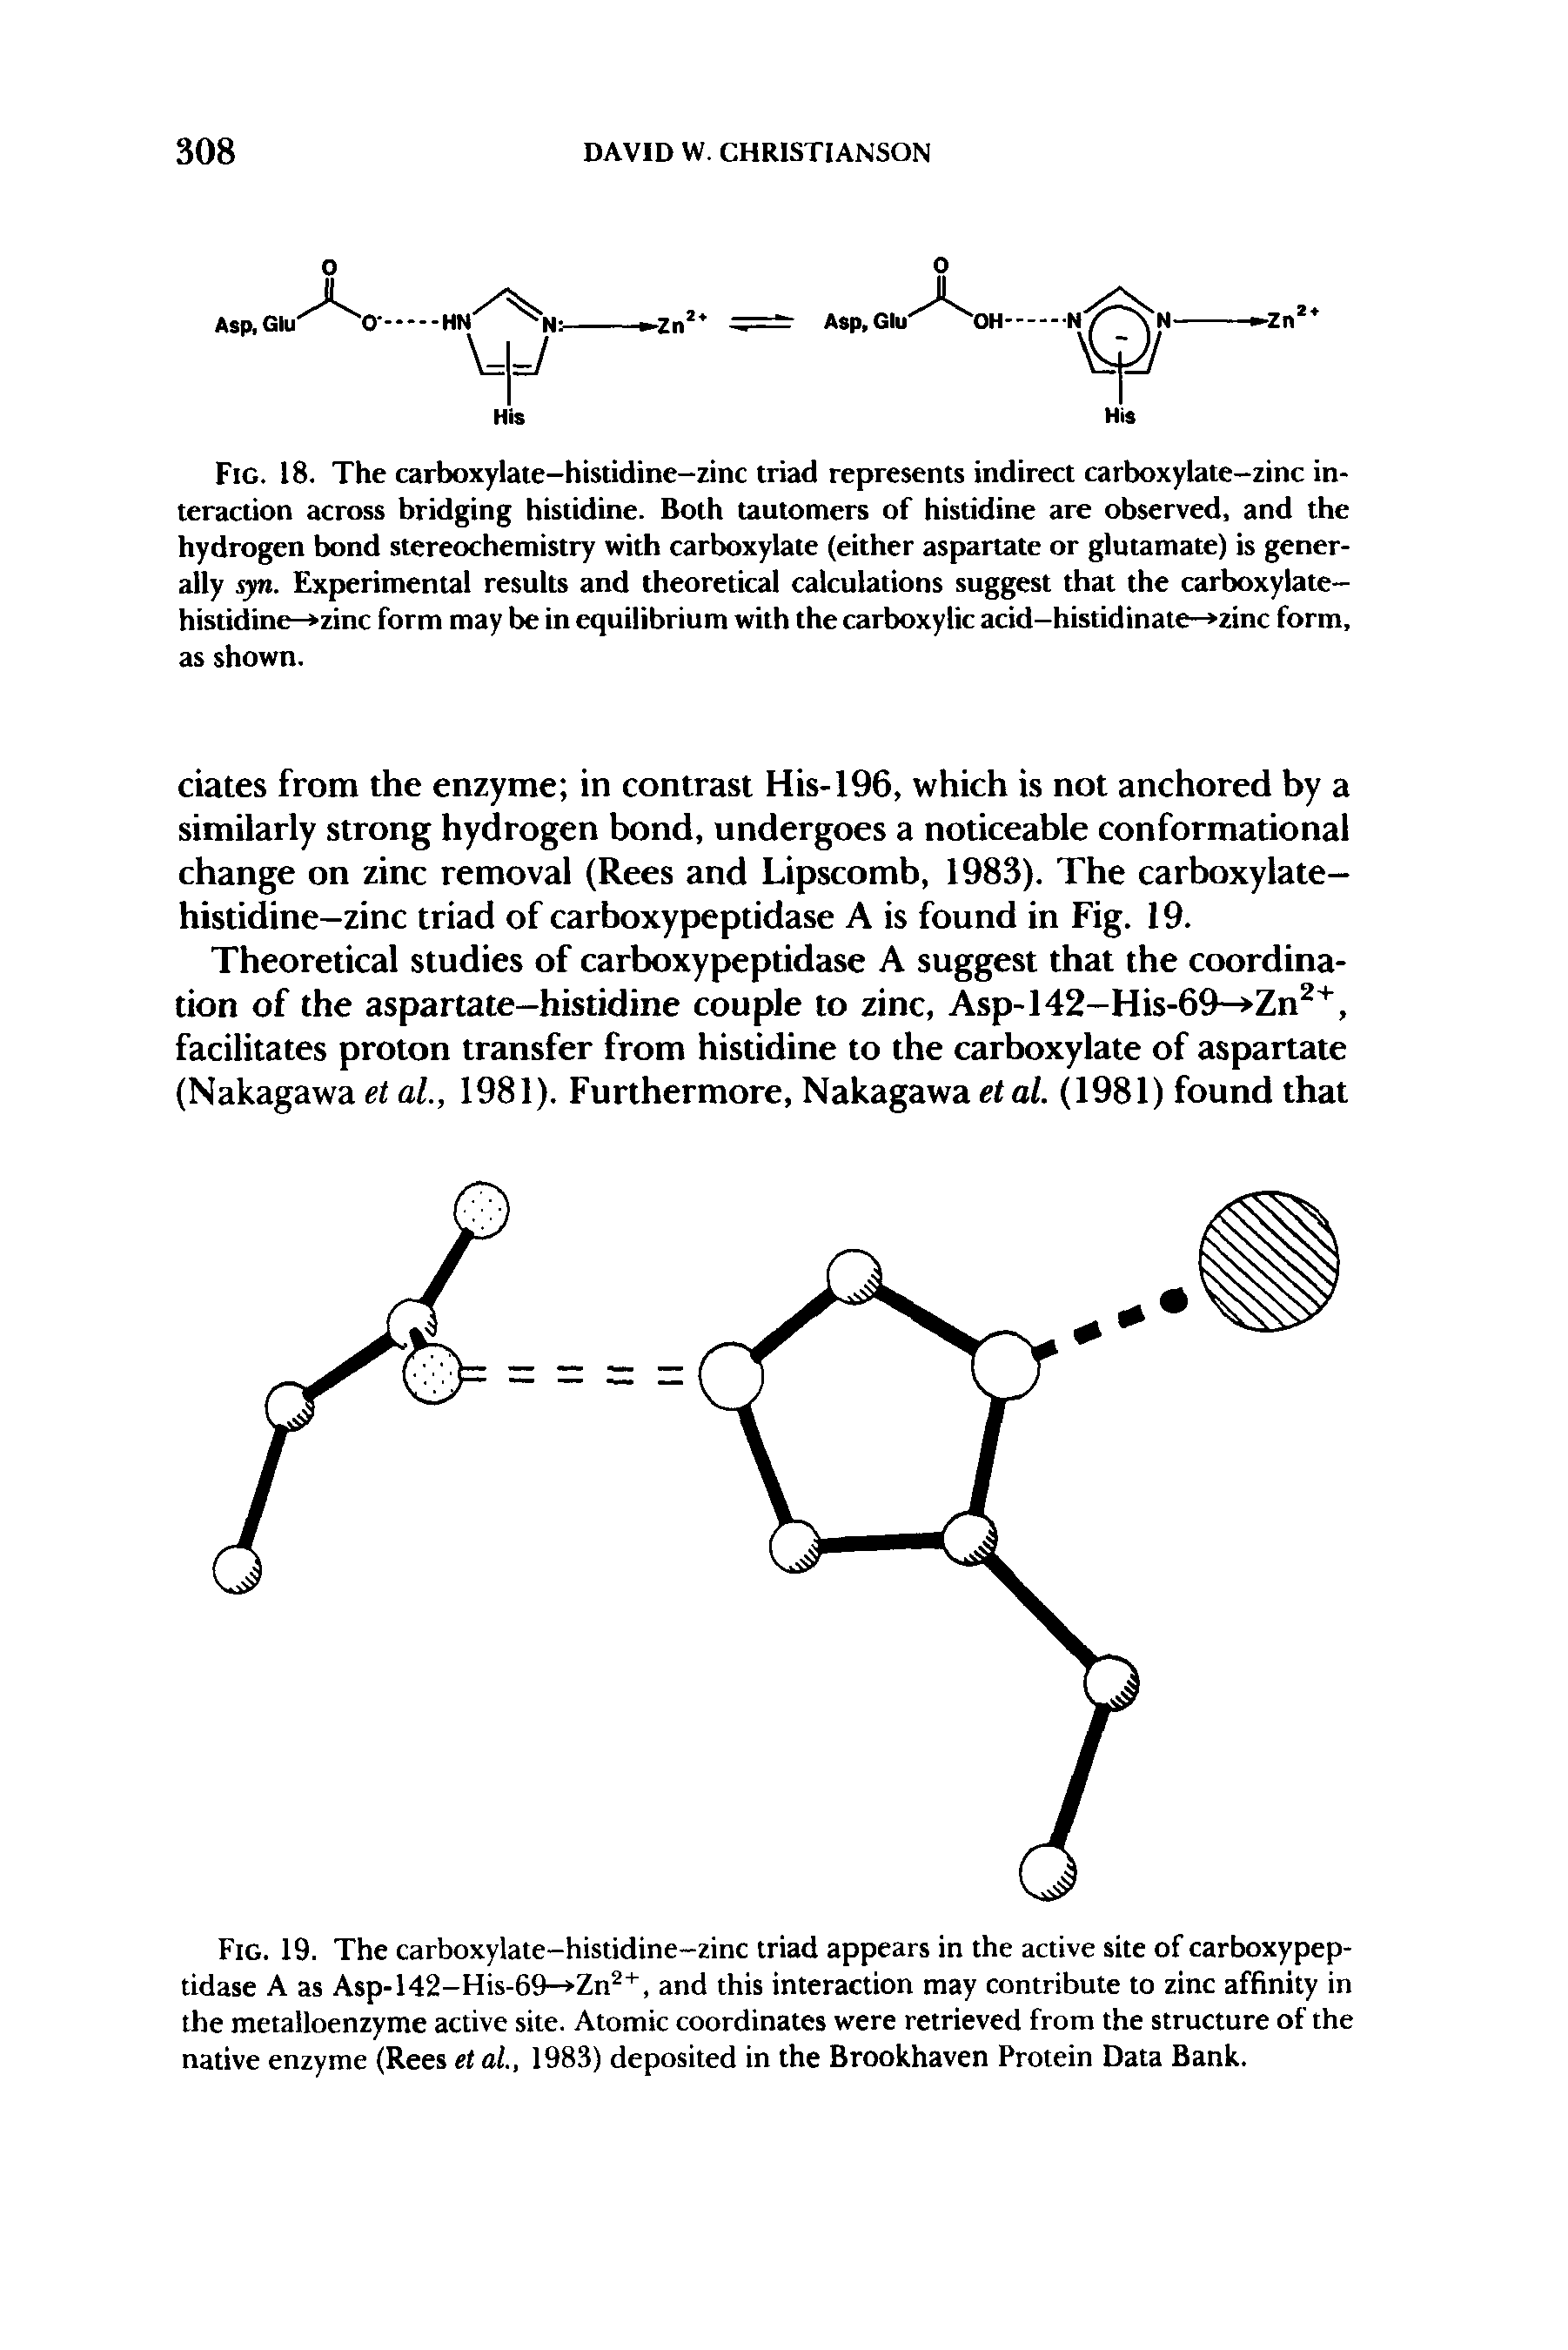 Fig. 18. The carboxylaie-histidine-zinc triad represents indirect carboxylate-zinc interaction across bridging histidine. Both tautomers of histidine are observed, and the hydrogen bond stereochemistry with carboxylate (either aspartate or glutamate) is generally syn. Experimental results and theoretical calculations suggest that the carboxylate-histidine- zinc form may be in equilibrium with the carboxylic acid-histidinate- zinc form, as shown.